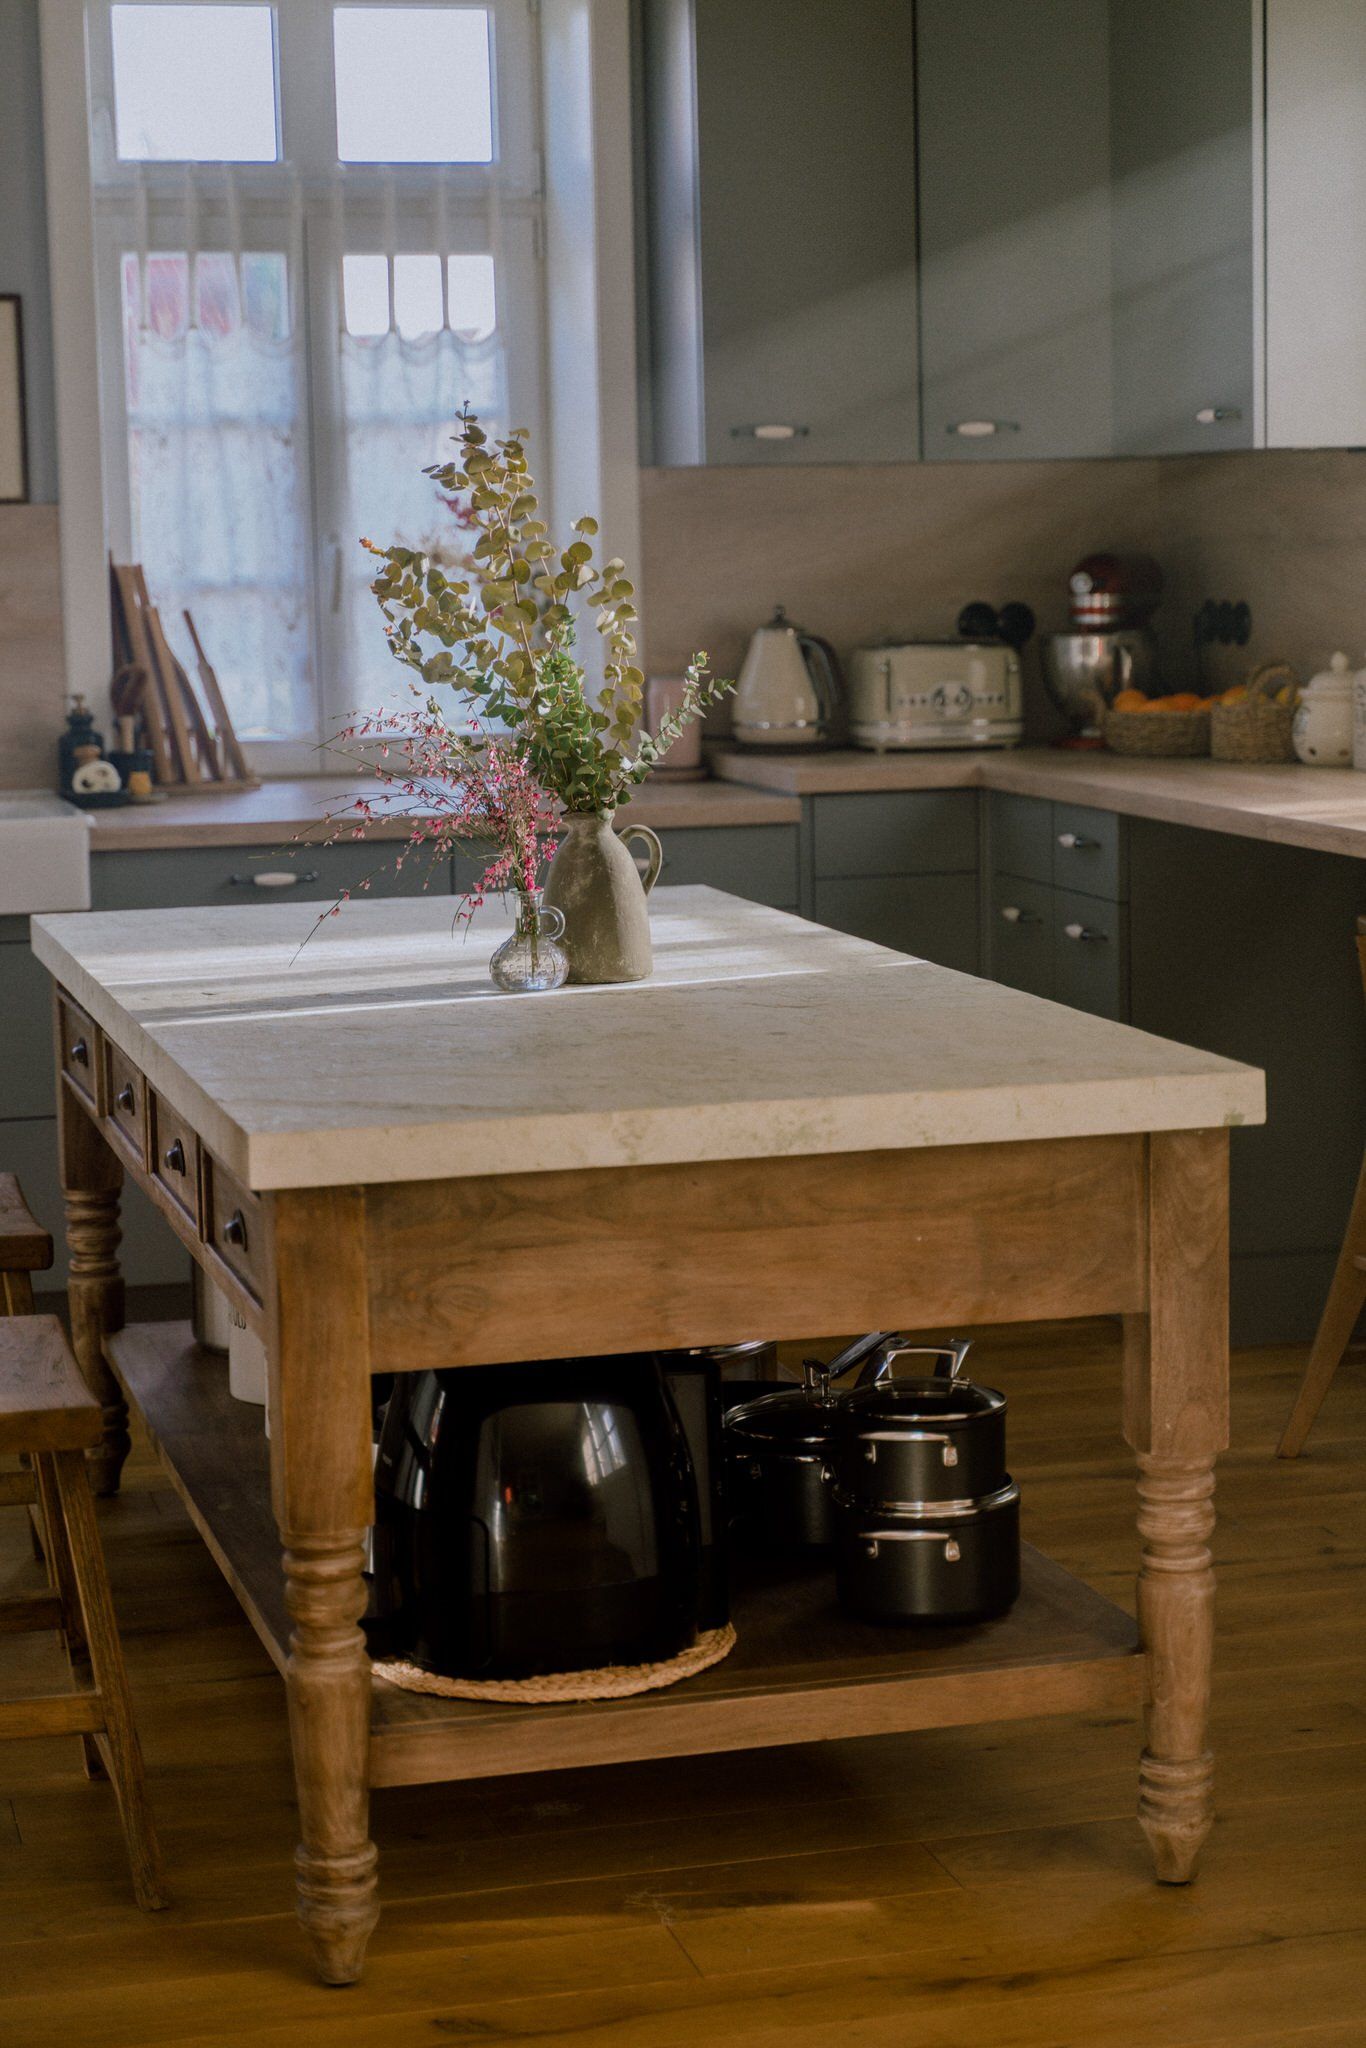 Modify your kitchen with the kitchen
island table